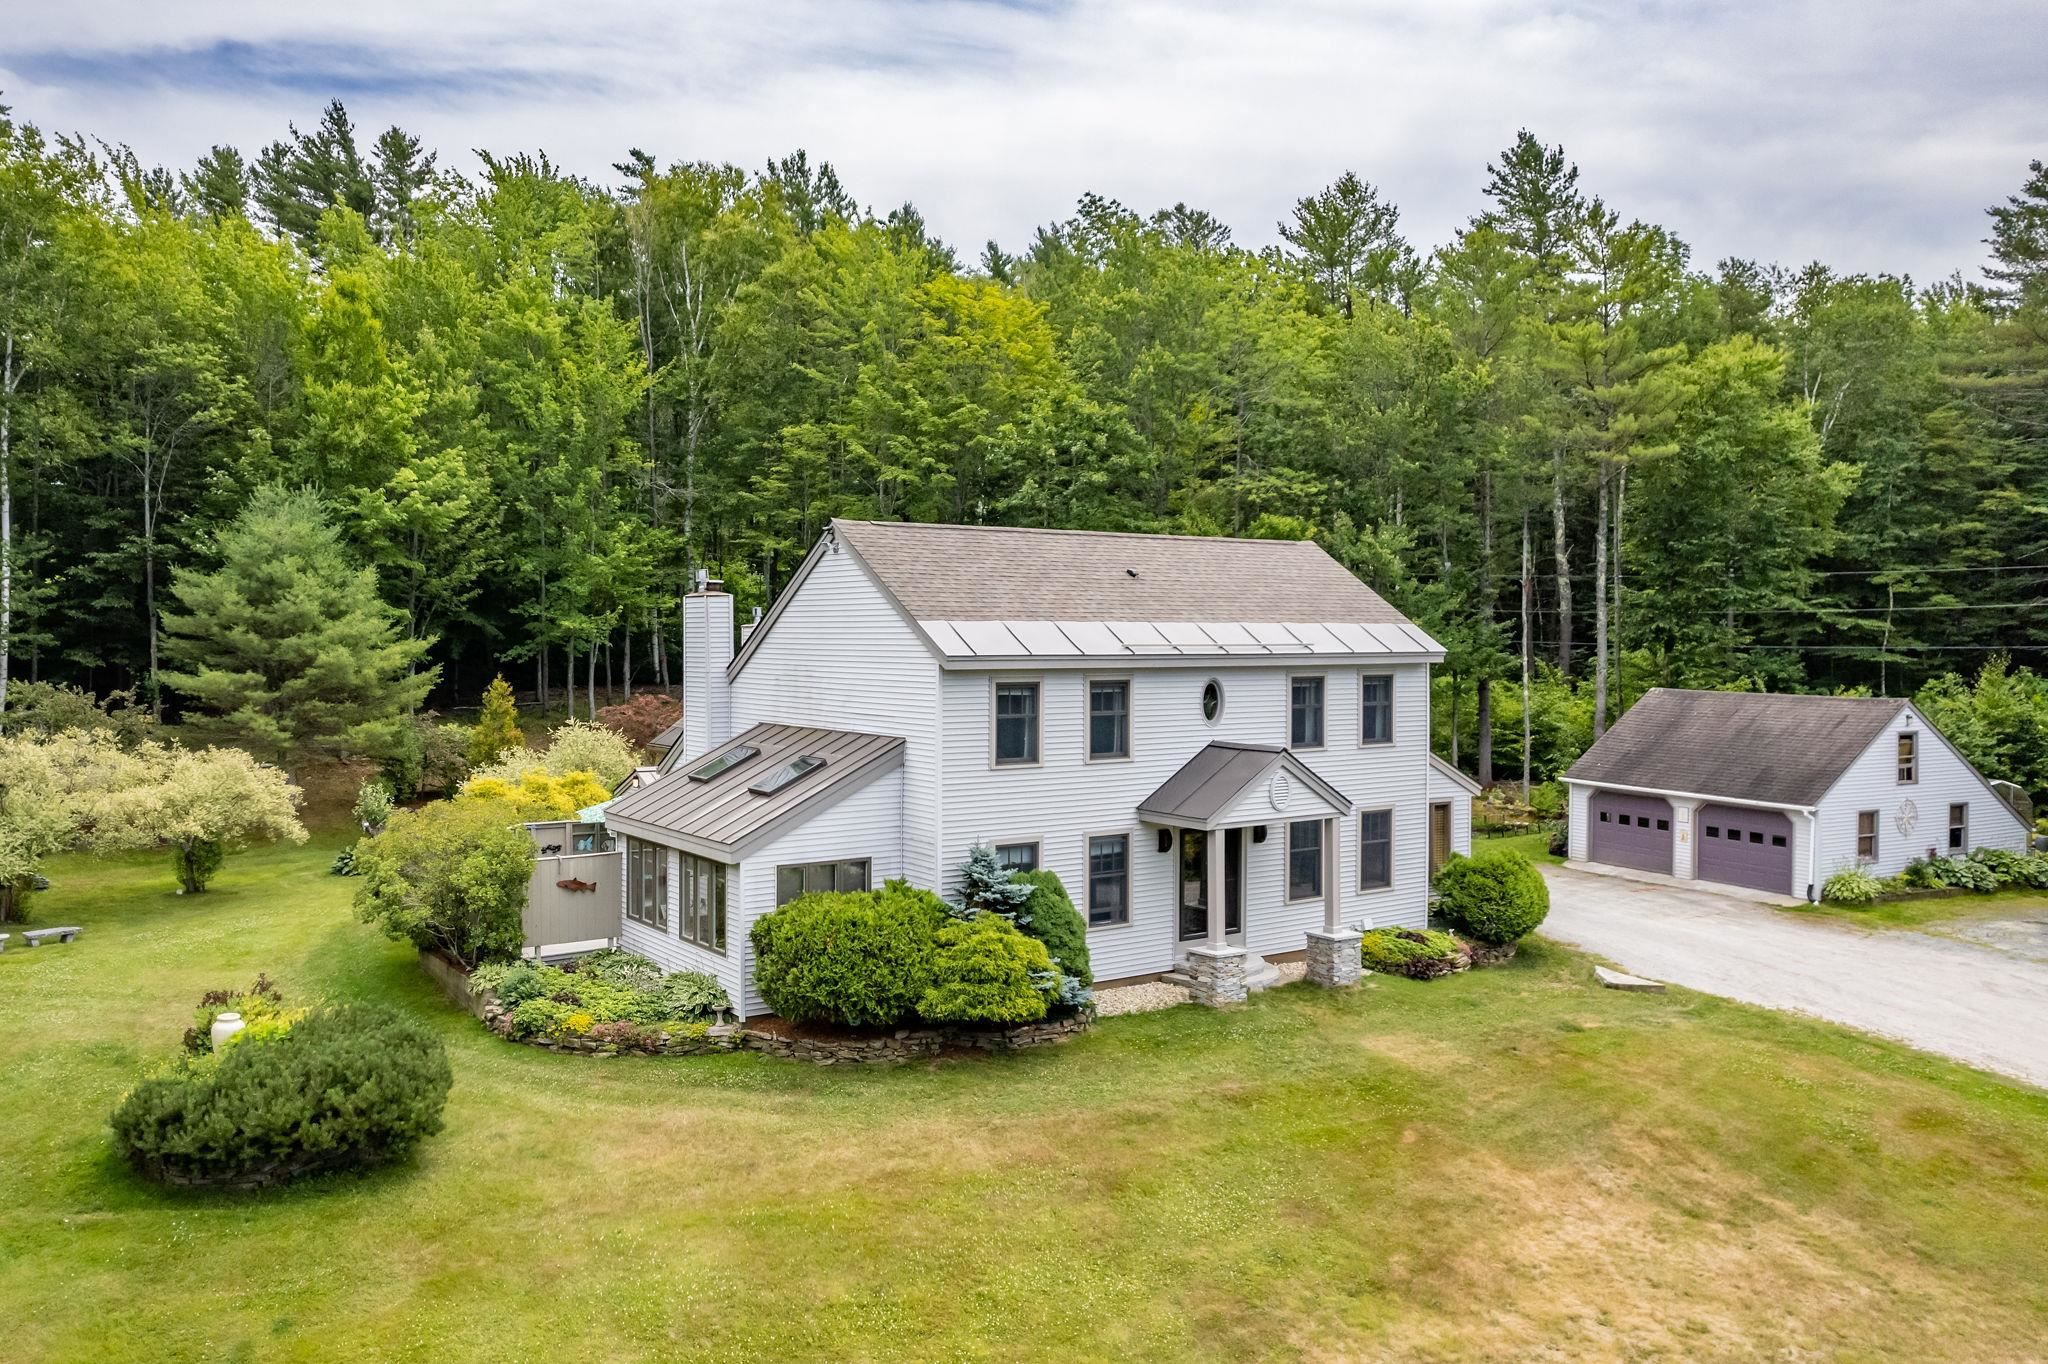 UNITY NH Homes for sale